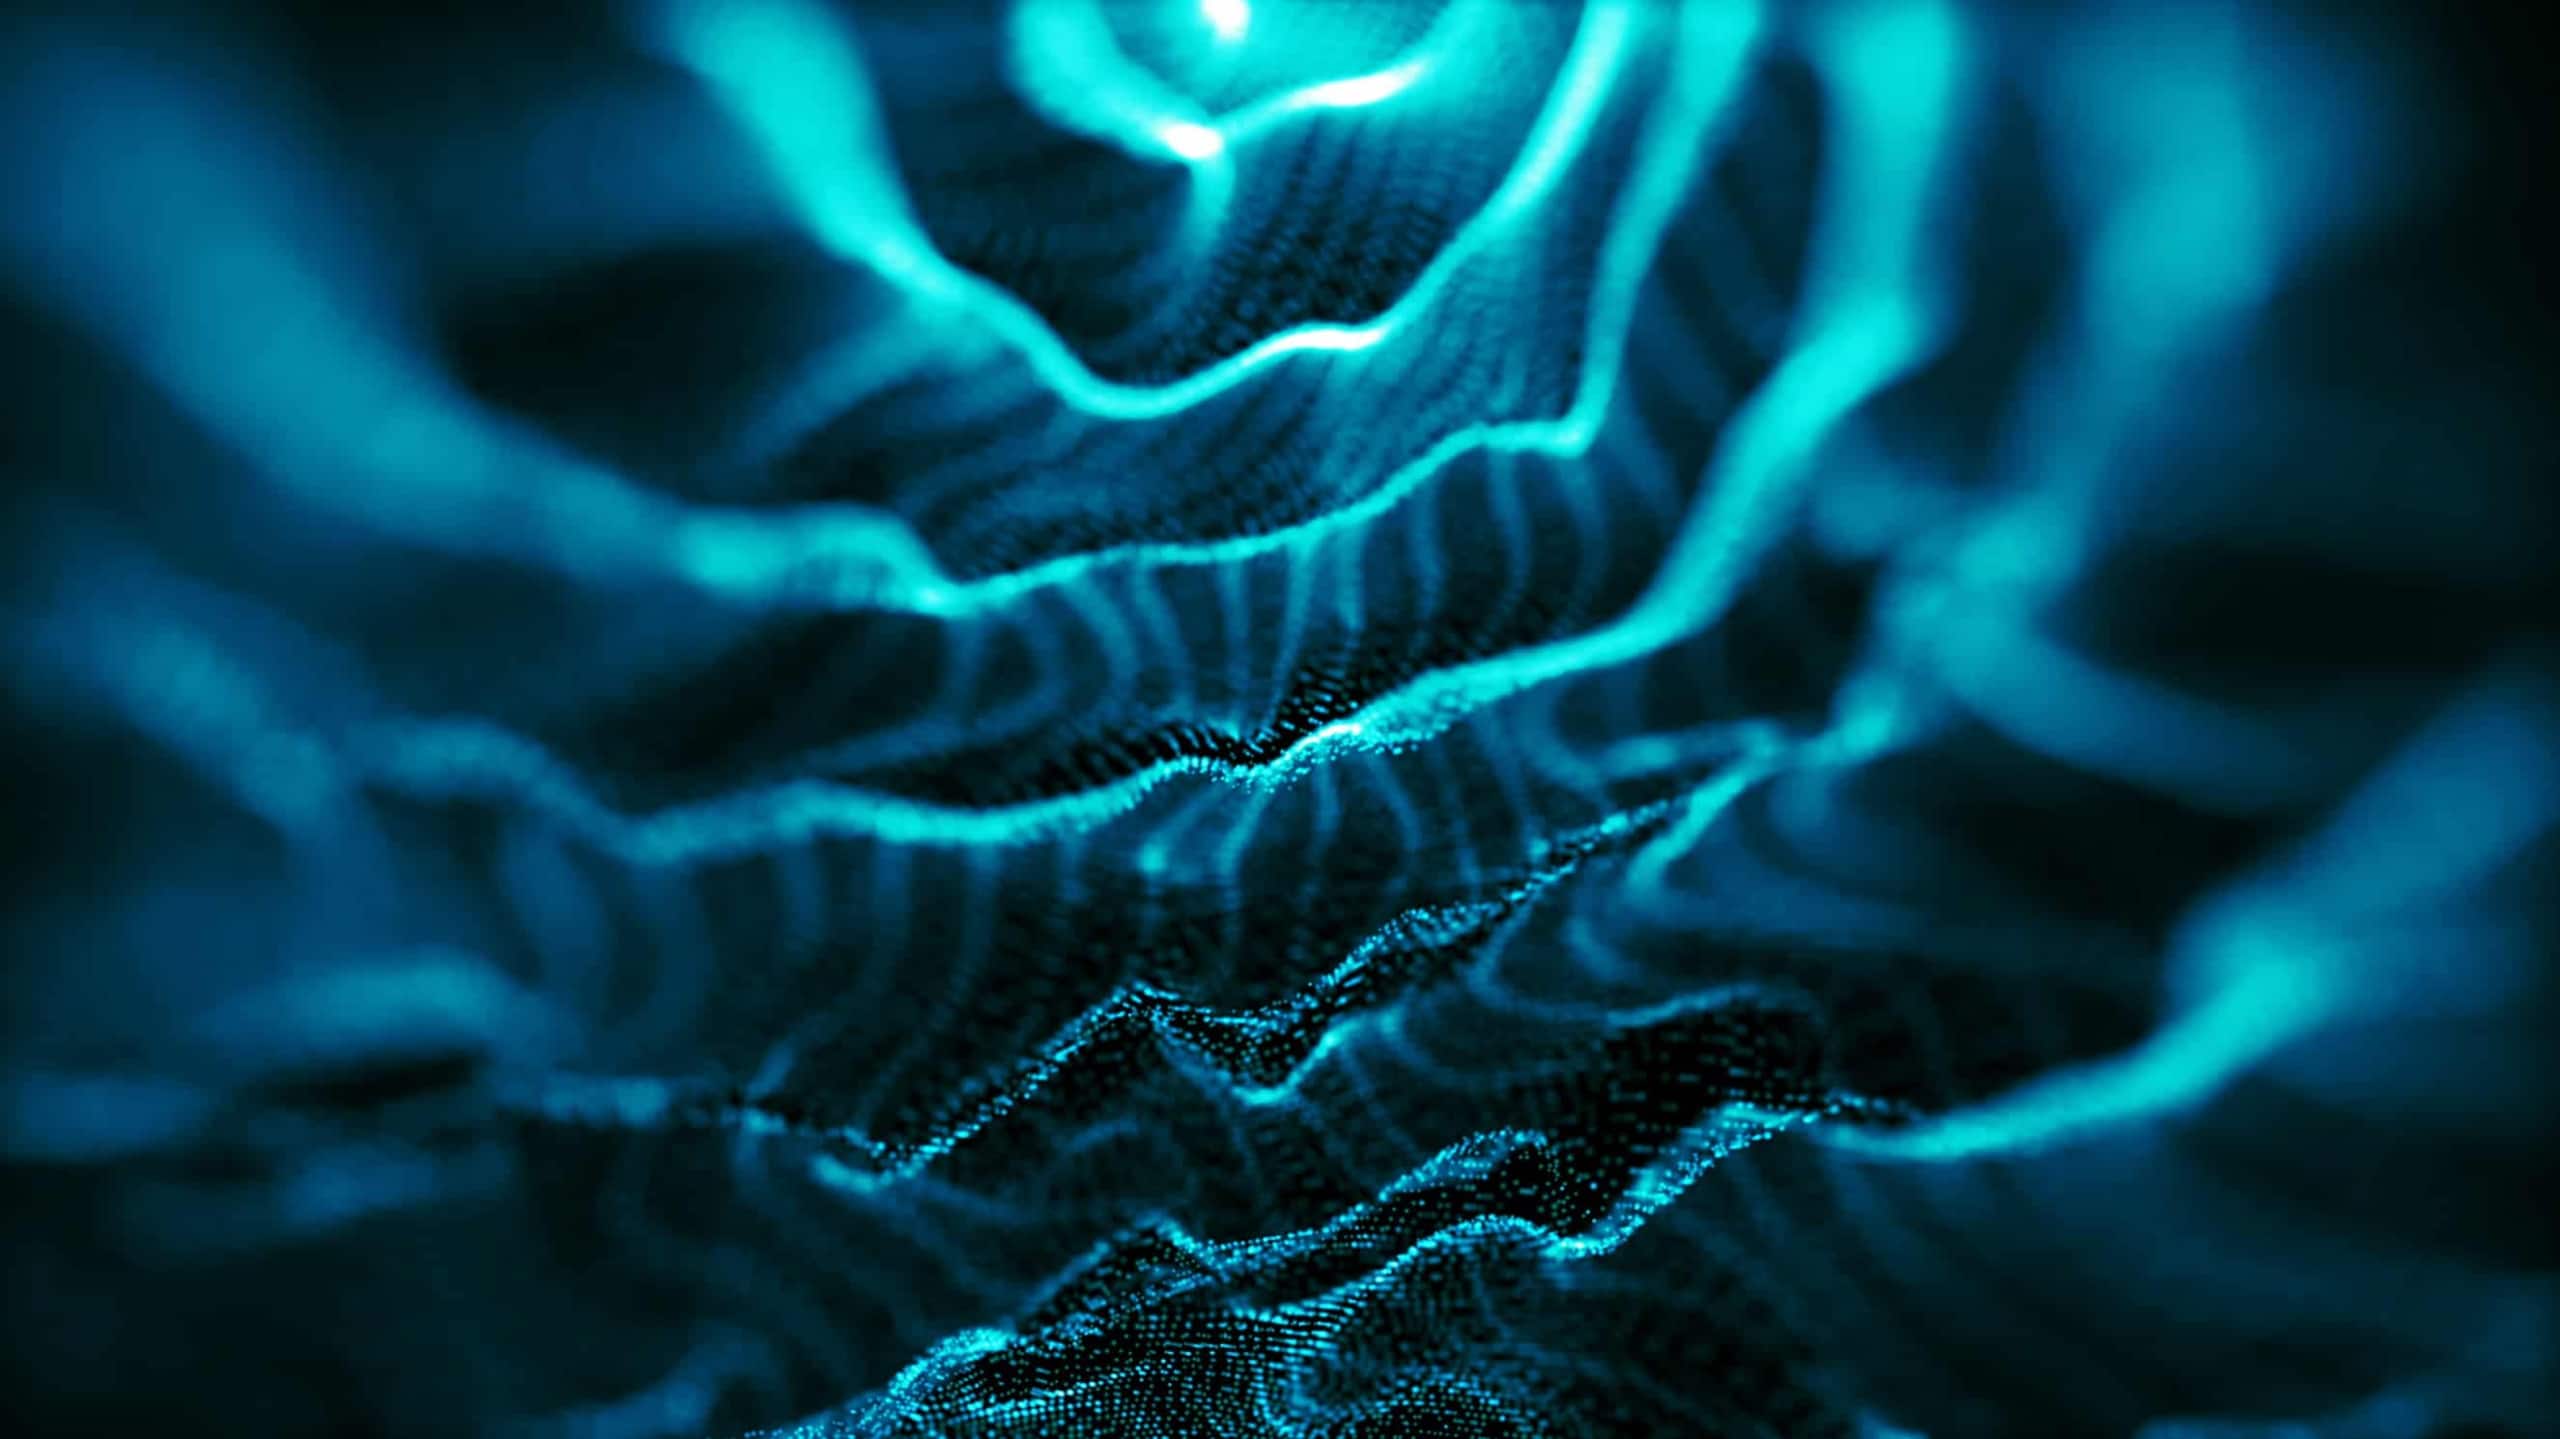 Abstract digital background depicting waves of blue neon grid lines on a dark backdrop, suggesting a visual representation of data flow or network activity.